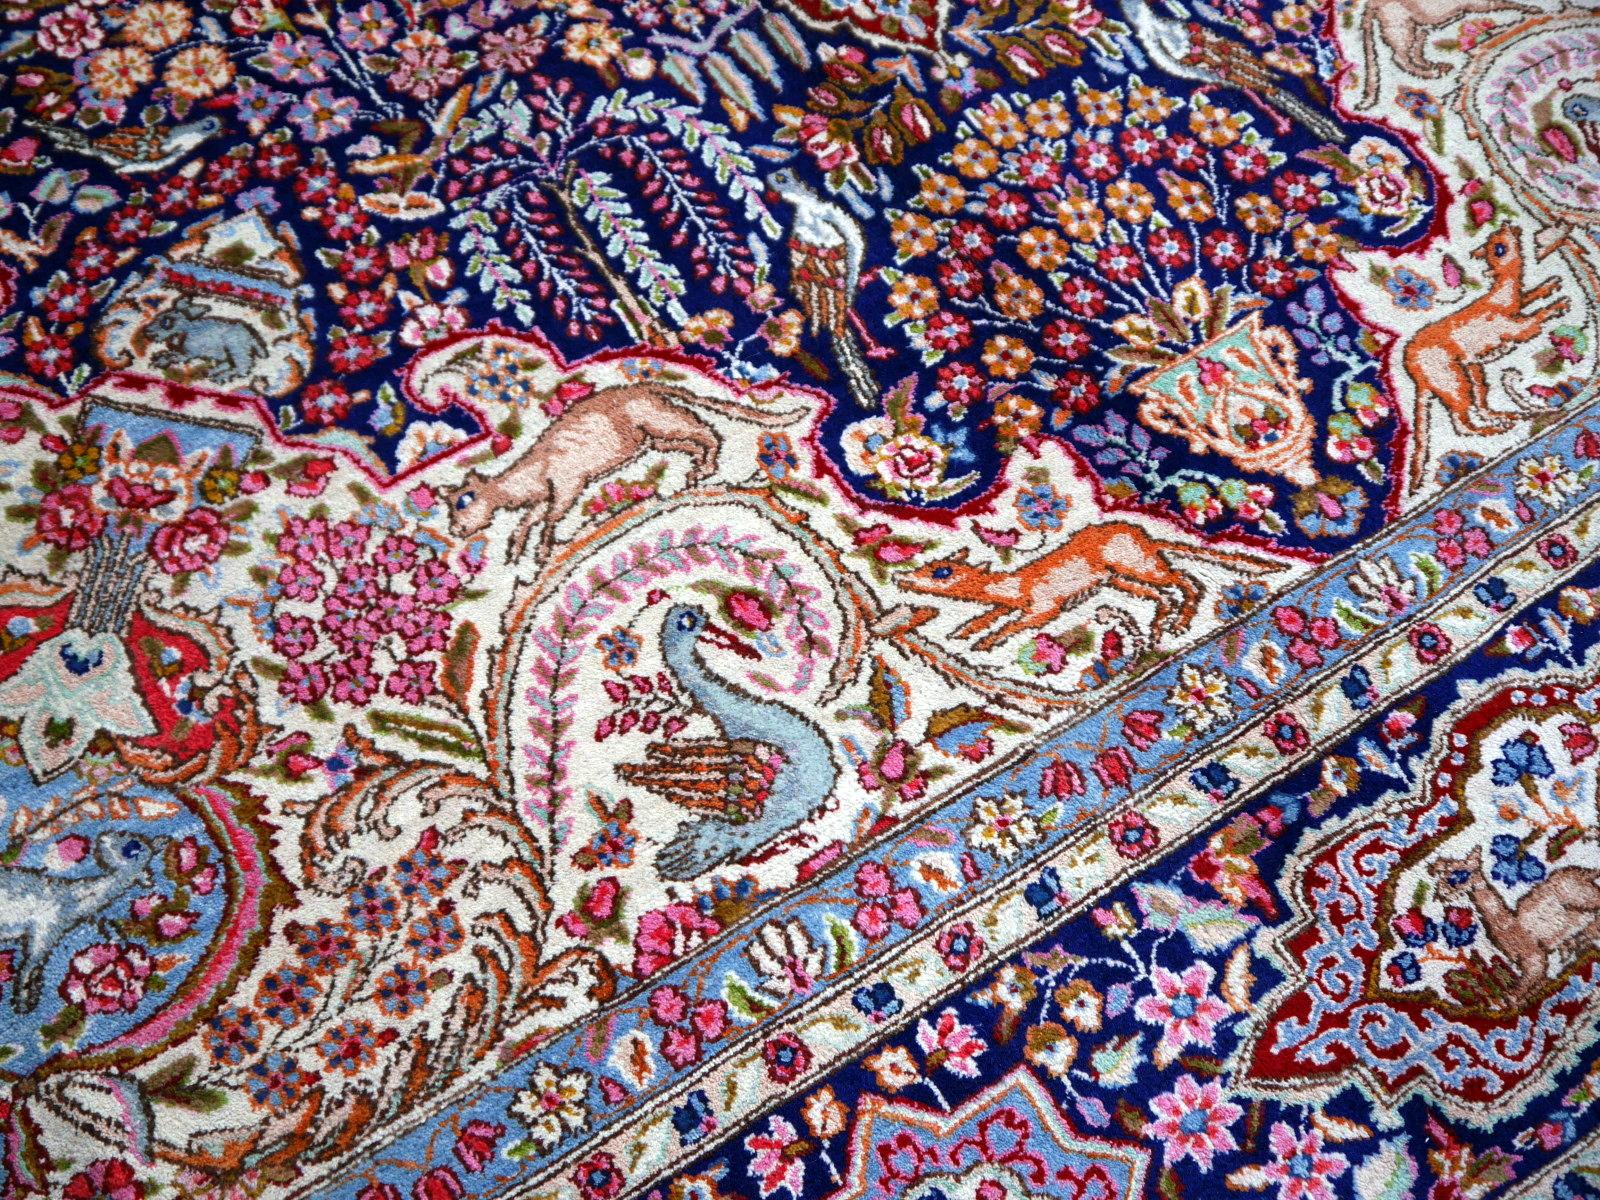 A fine, hand knotted vintage rug with traditional Oriental floral hunting design. Size 13 x 10 ft / 400 x 300 cm.

This stunning rug has vibrant colors and a decorative design with rich motifs. Flowers, lions, deer and arabesques are filling the